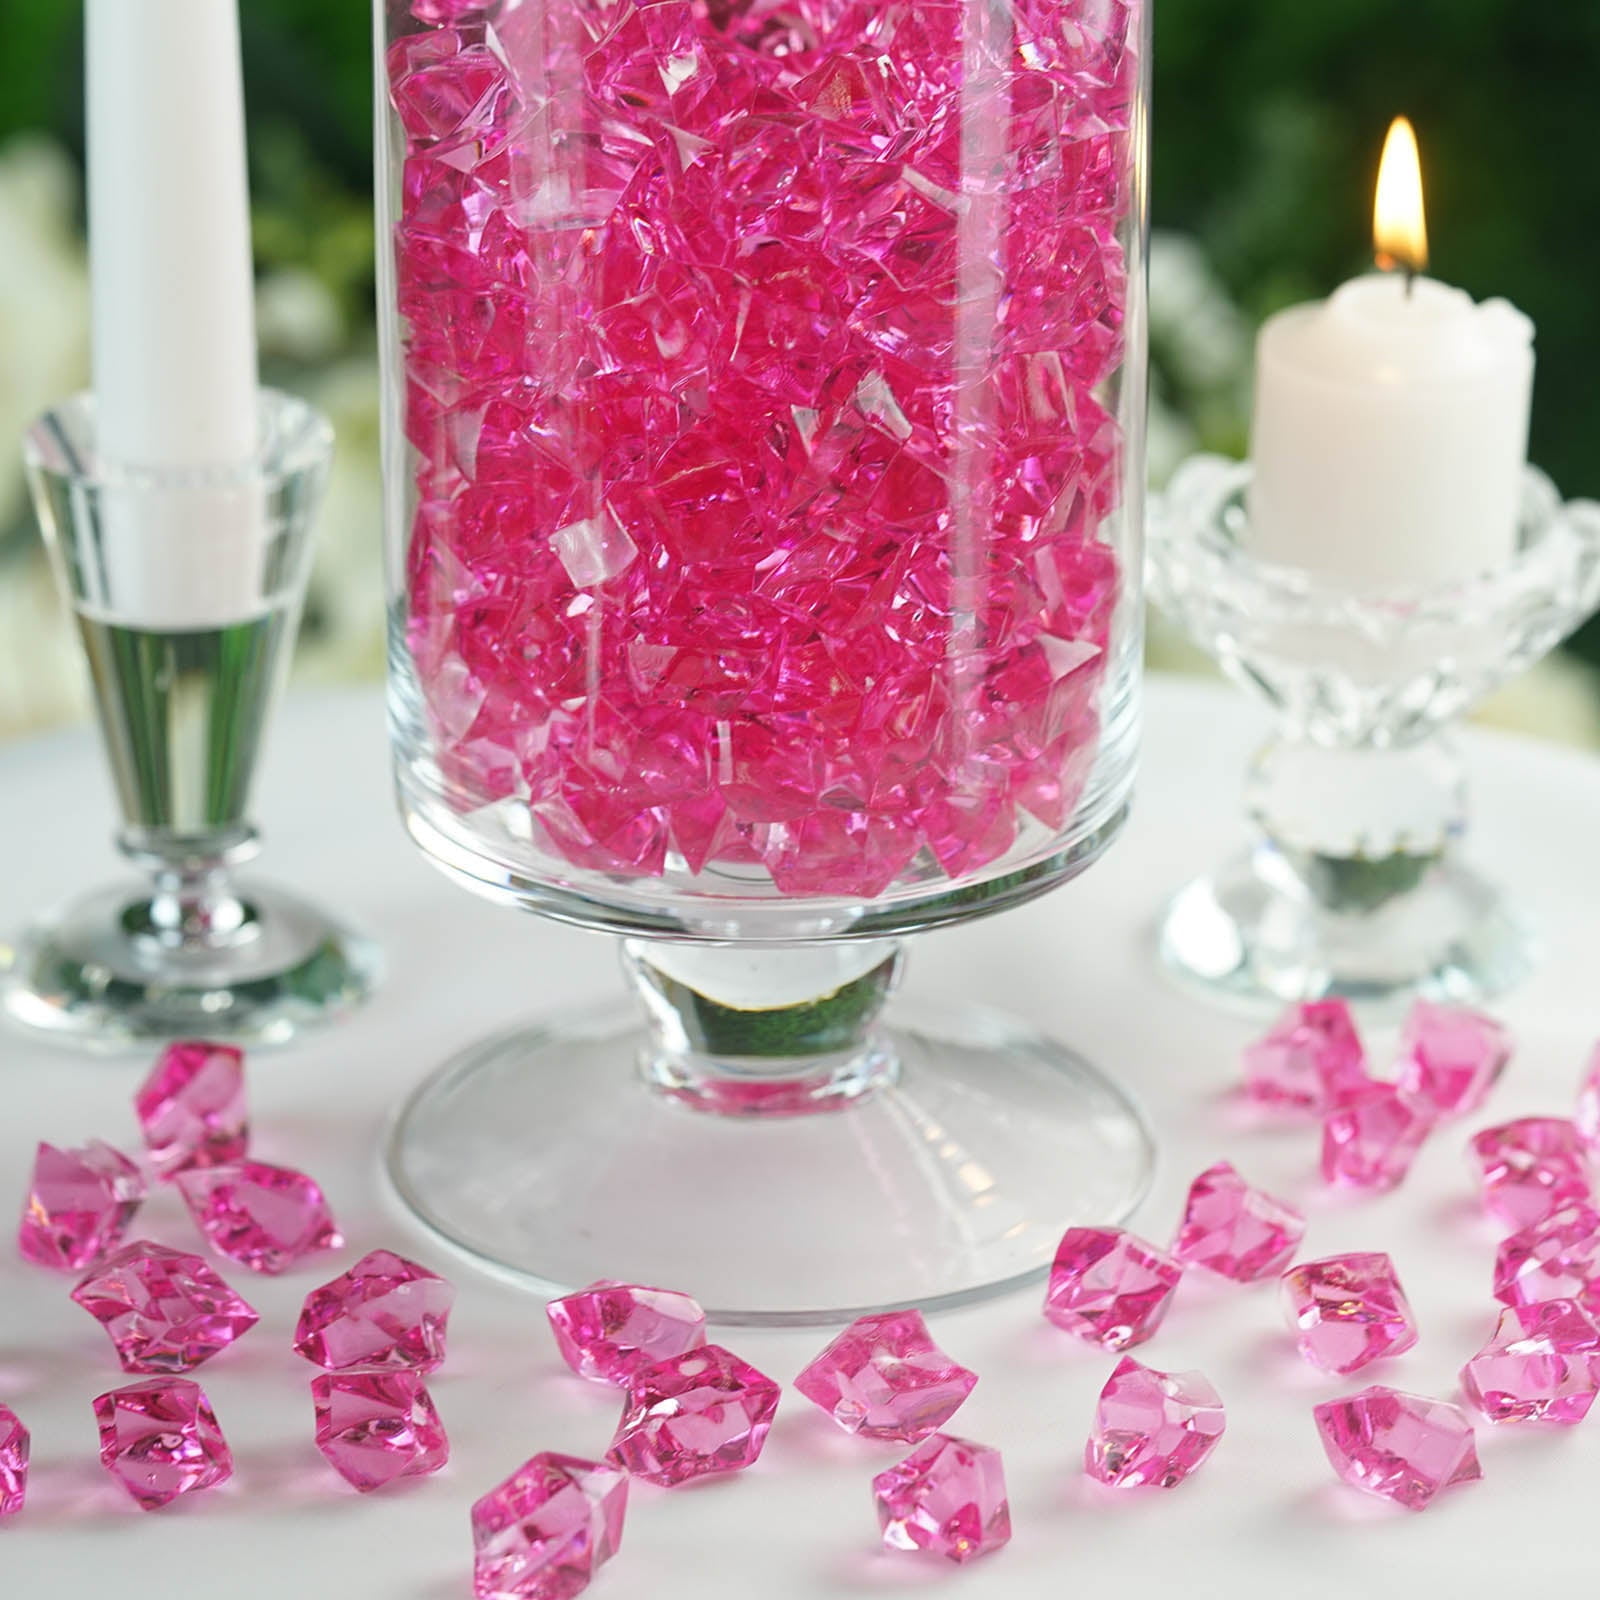 Efavormart 300 pcs FUSHIA Large Acrylic Ice Crystals Vase Fillers Table  Scatters Decorations For Banquet Events Decorations - Walmart.com